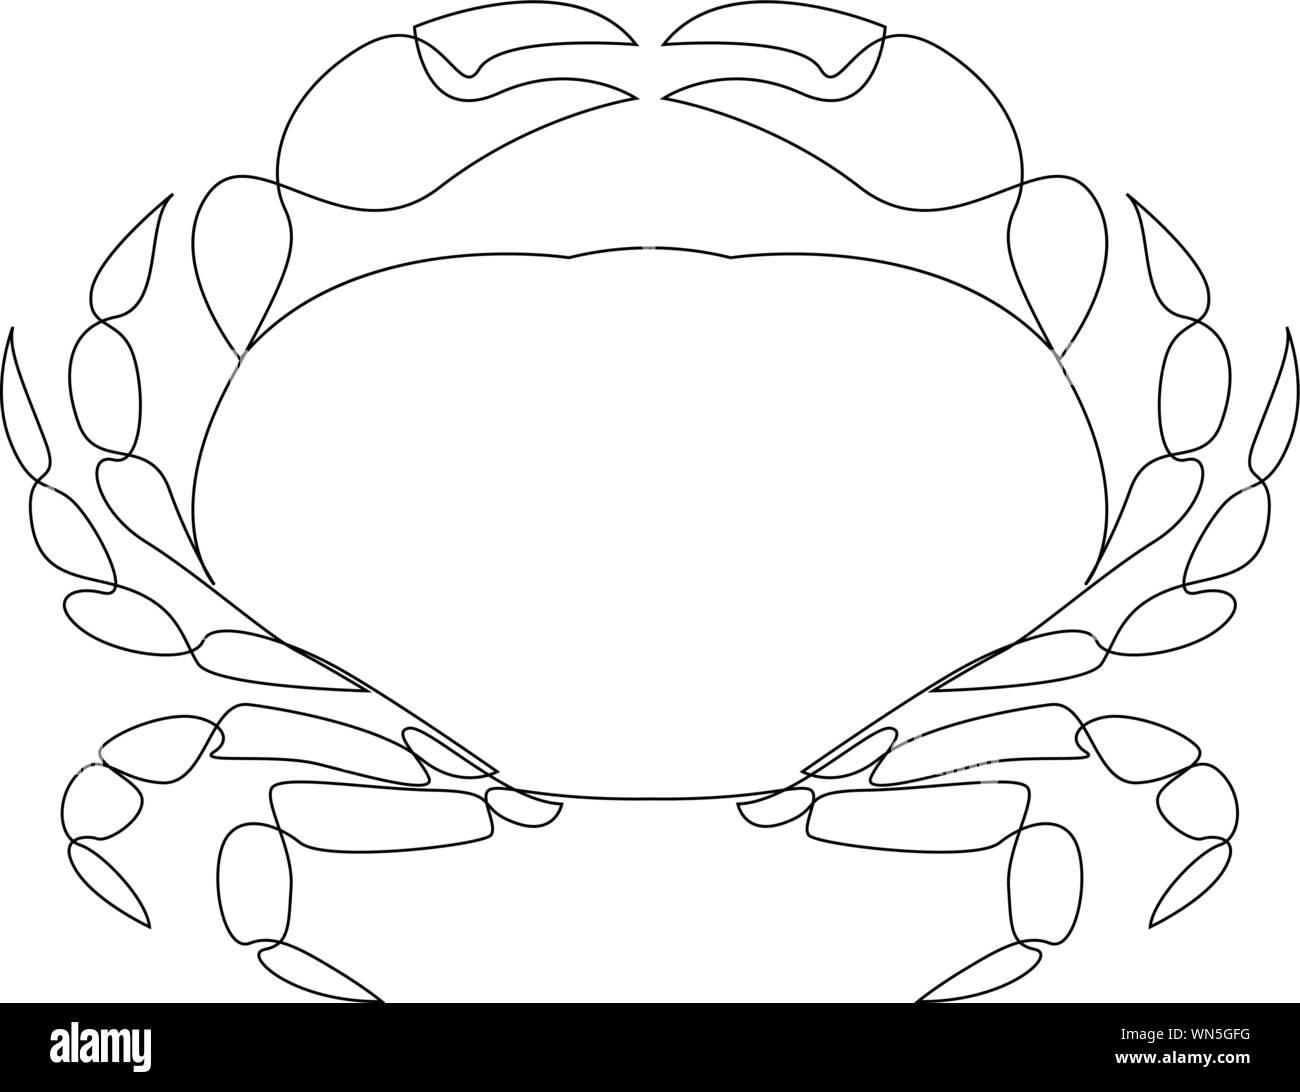 Crab illustration drawn by one line. Minimalist style vector illustration Stock Vector